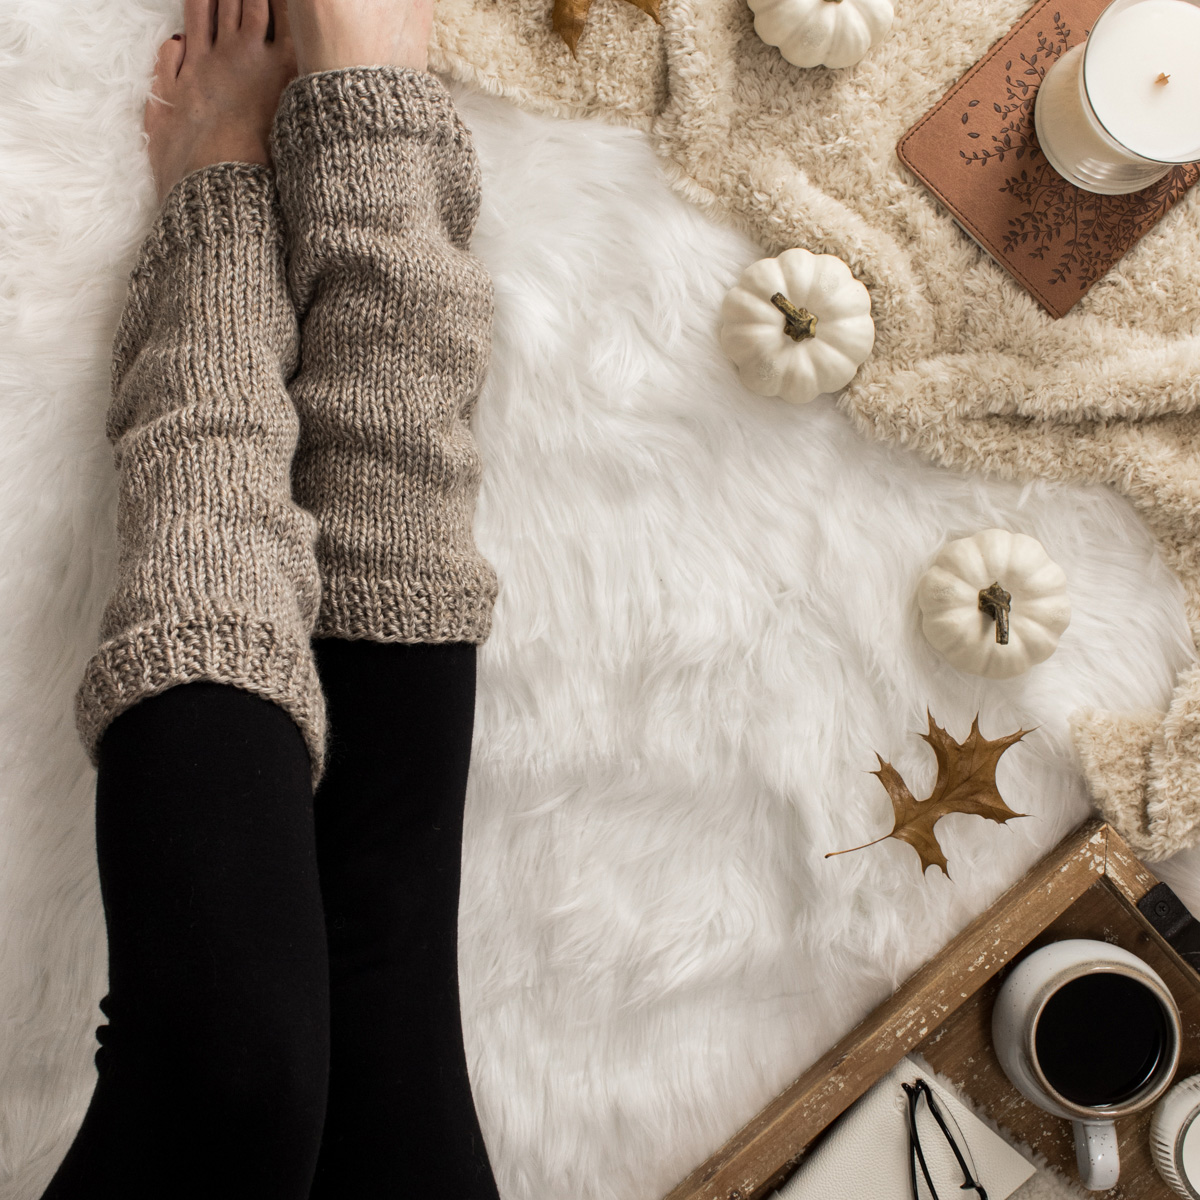 How to Knit Leg Warmers